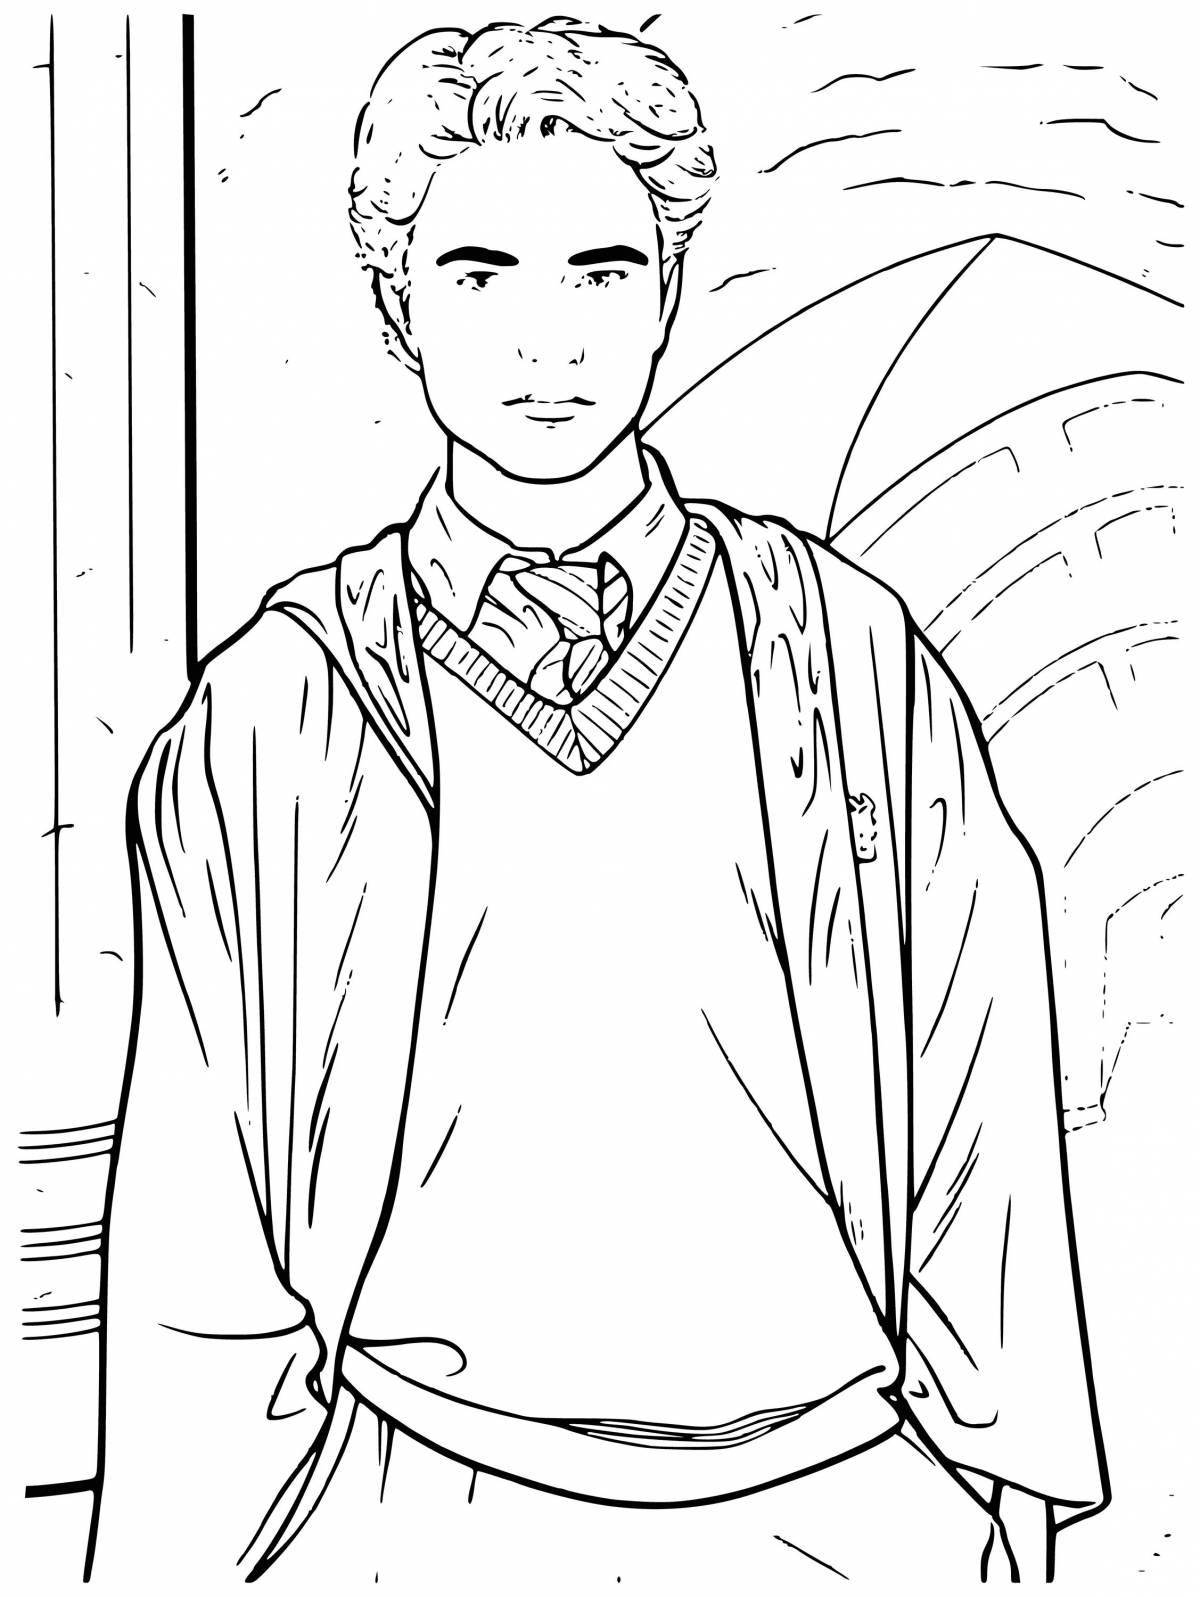 Colorful tom riddle coloring page